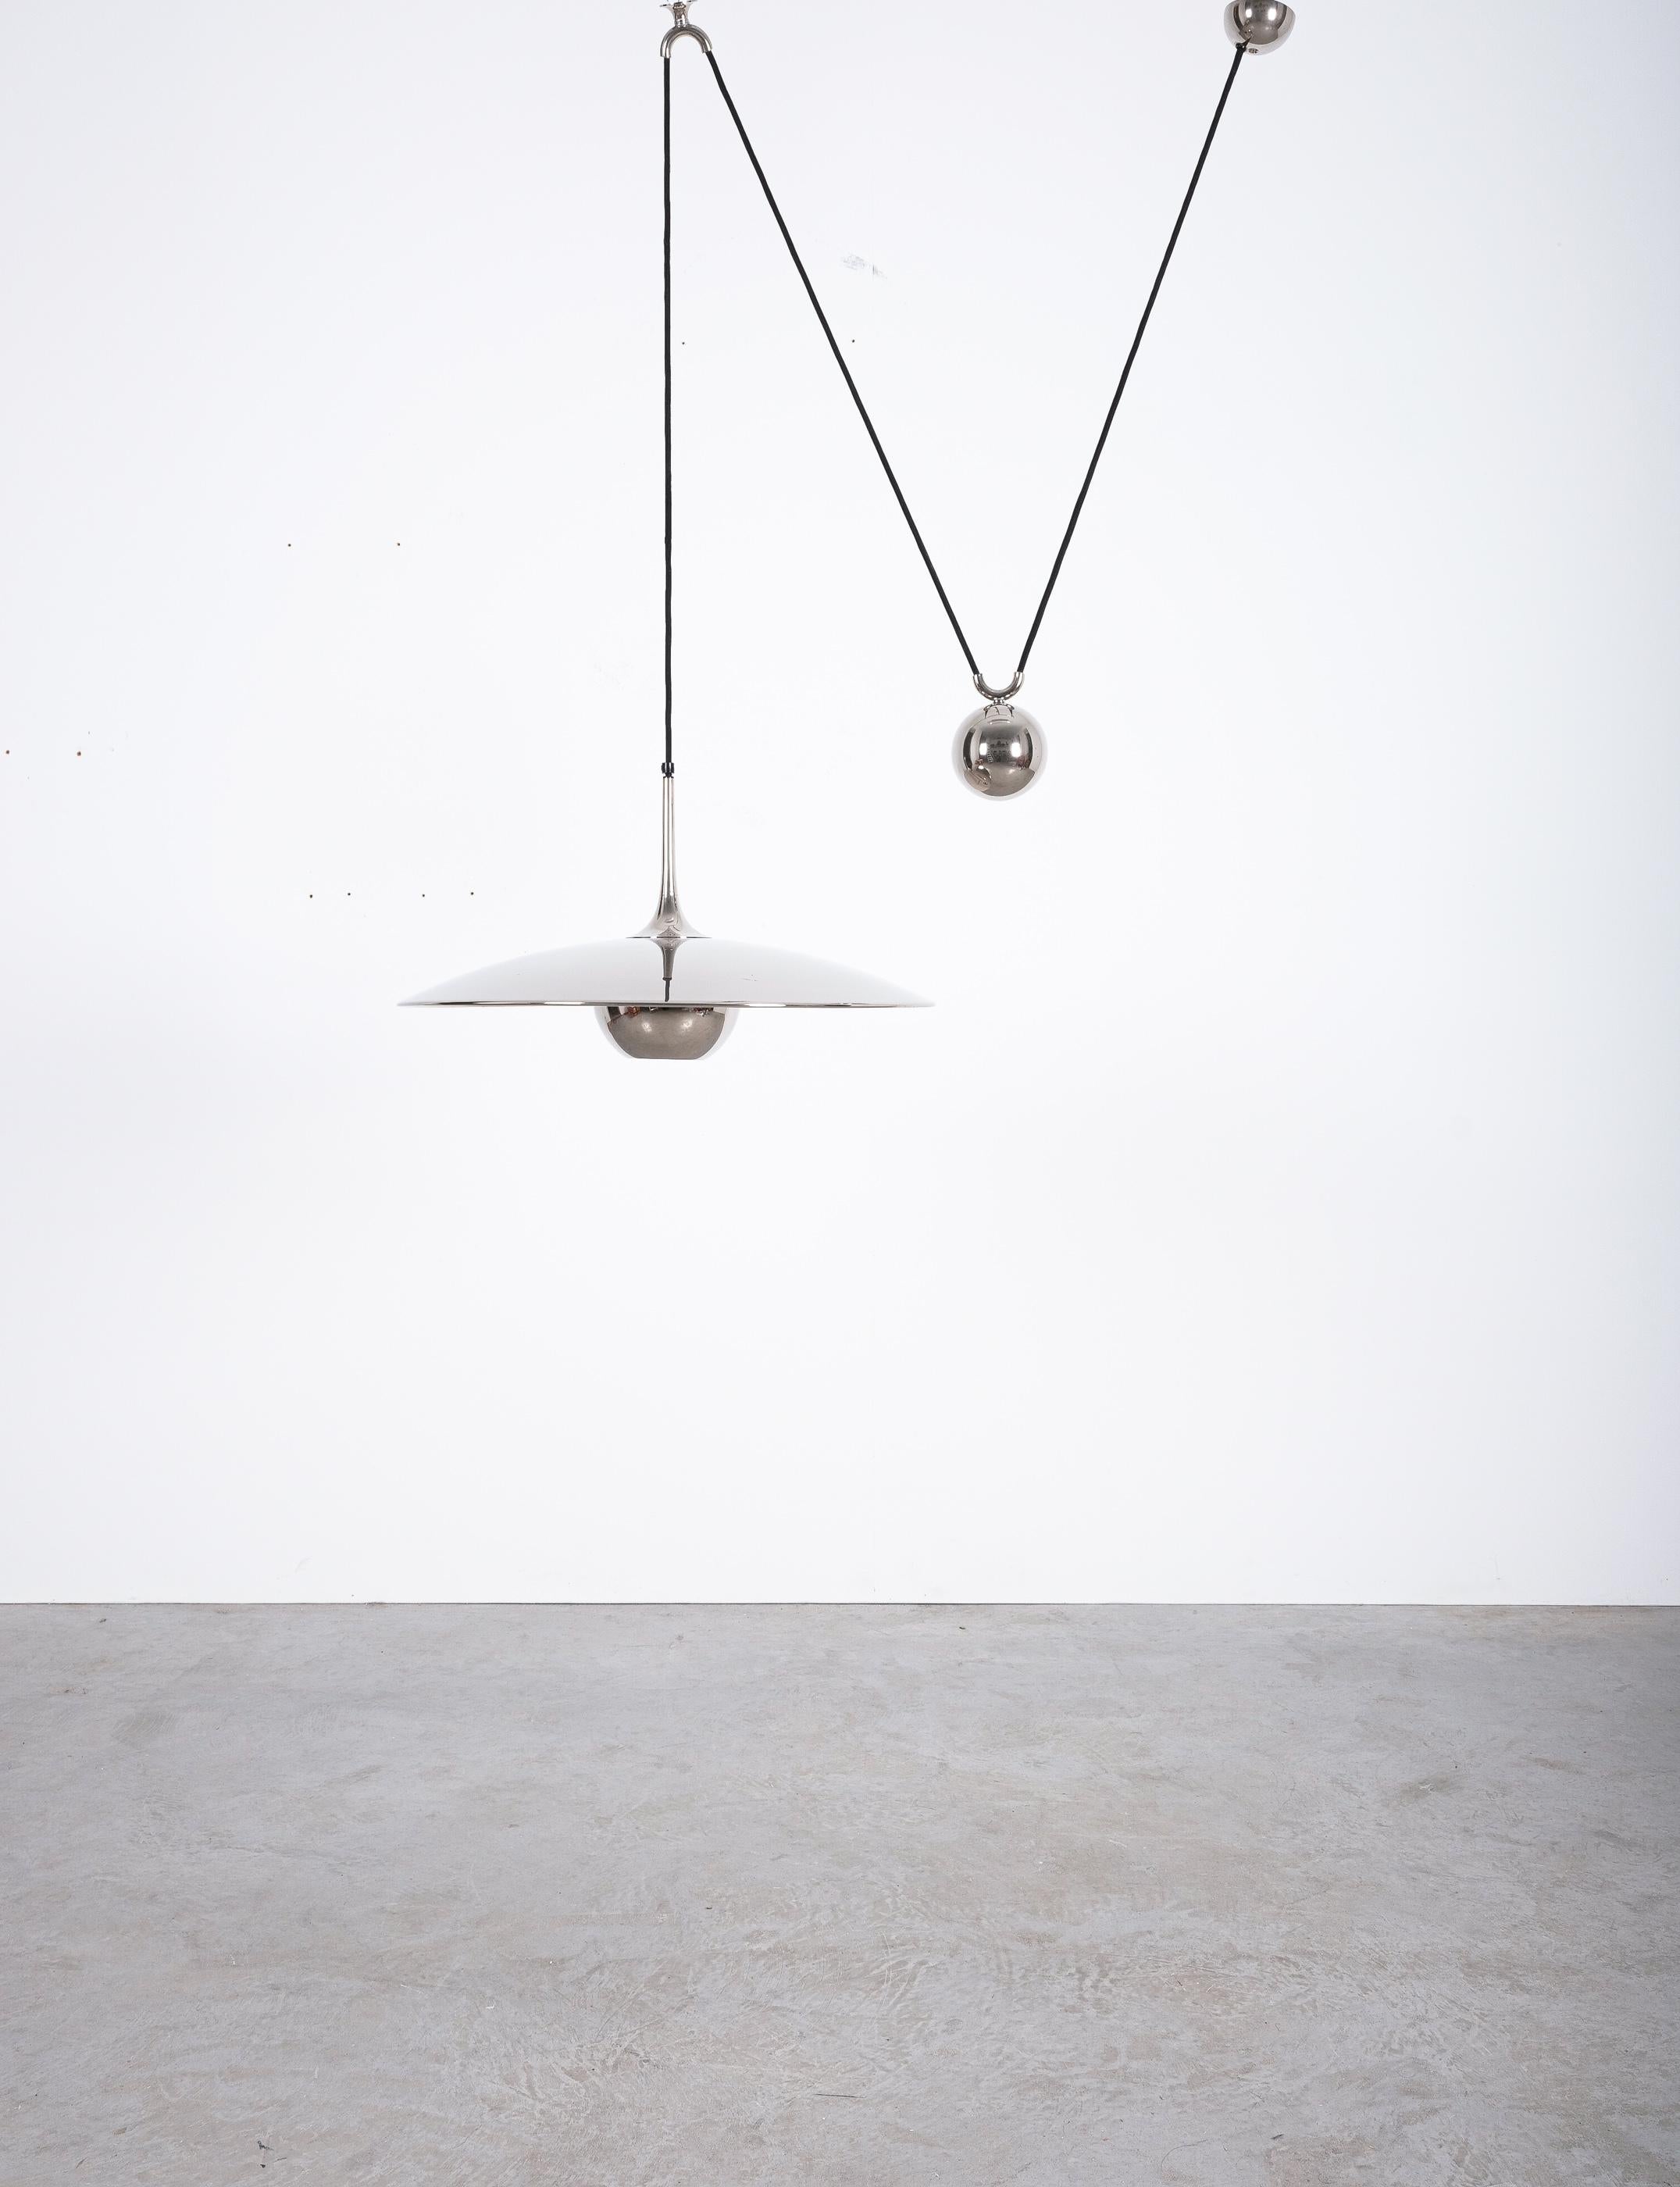 Florian Schulz counterweight light Ono in chrome finish

Elegant highly polished chromed brass pendant lamp by Florian Schulz/Germany with a shiny finish and heavy counterweight to easily adjust the light in height. Very good condition, it holds